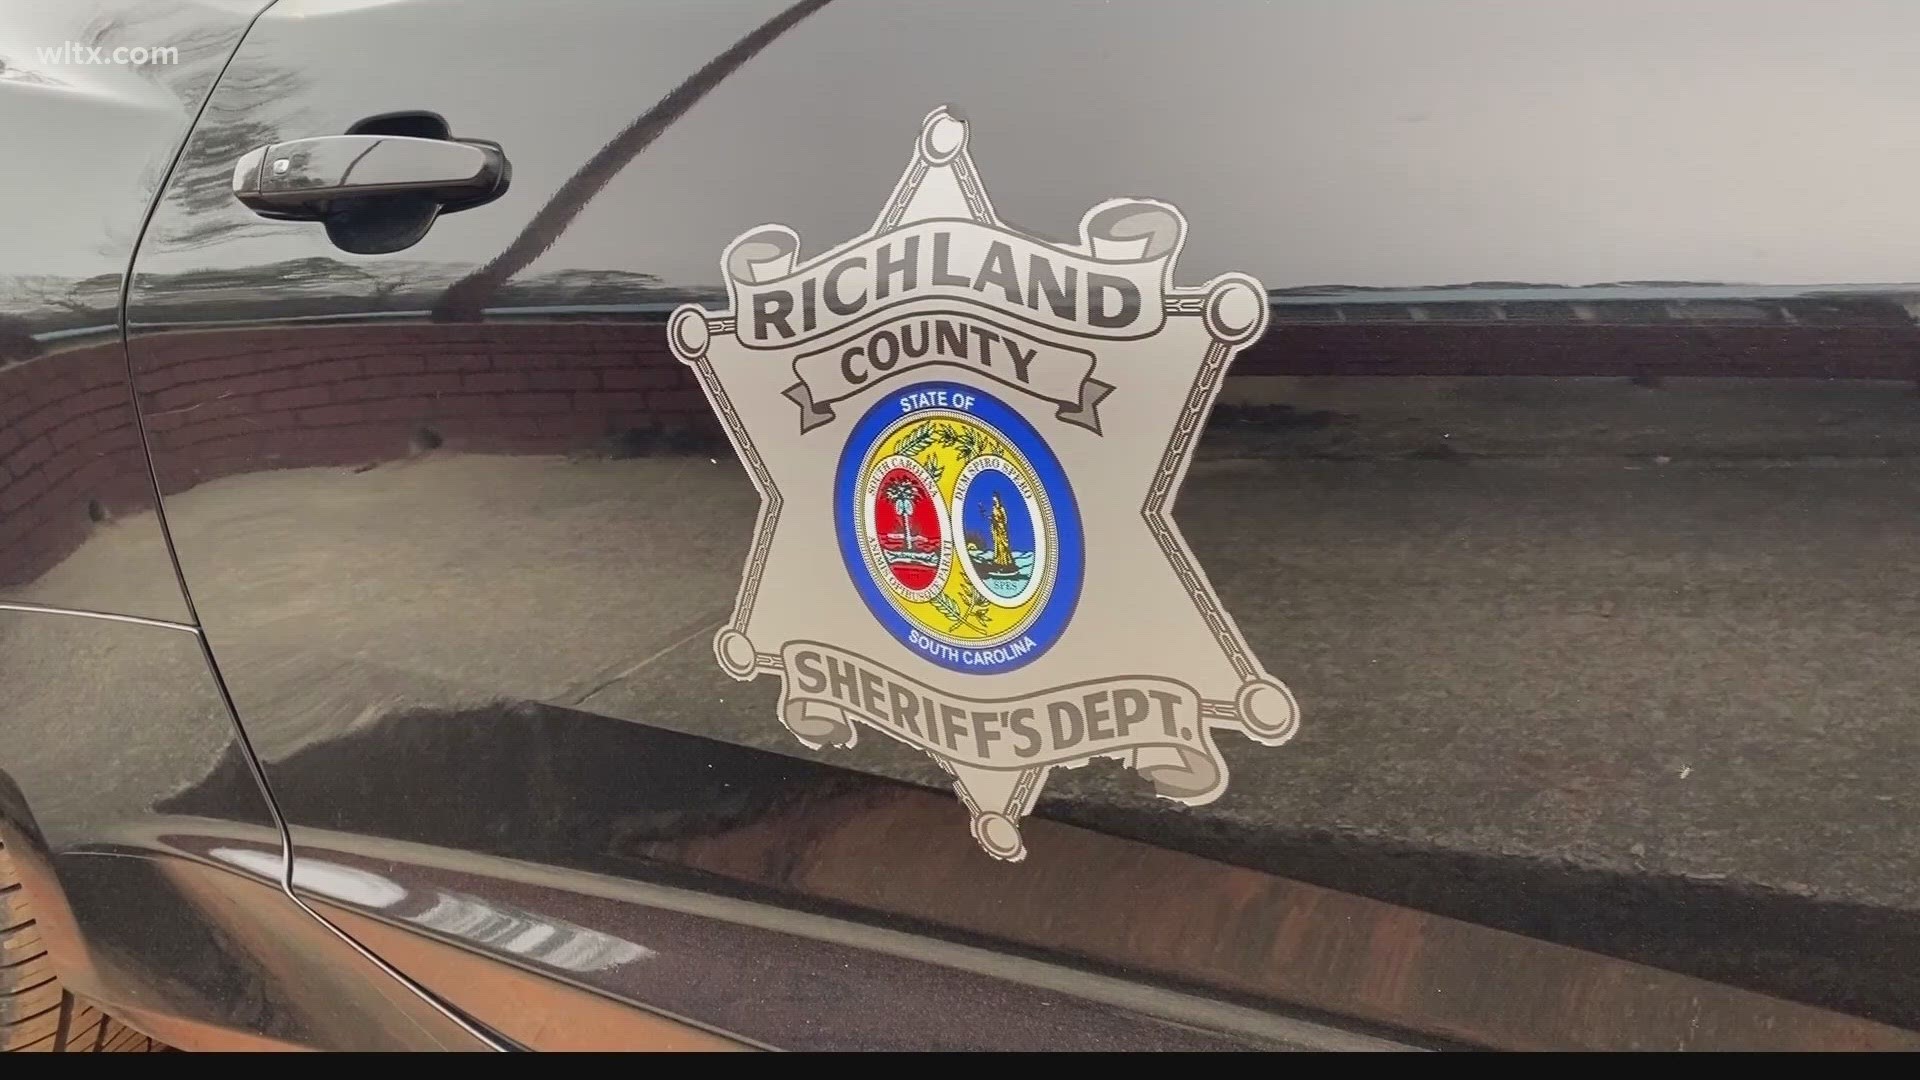 The Richland County Sheriff's Department is gearing up for the release of a new Netflix docuseries about the search for missing people.